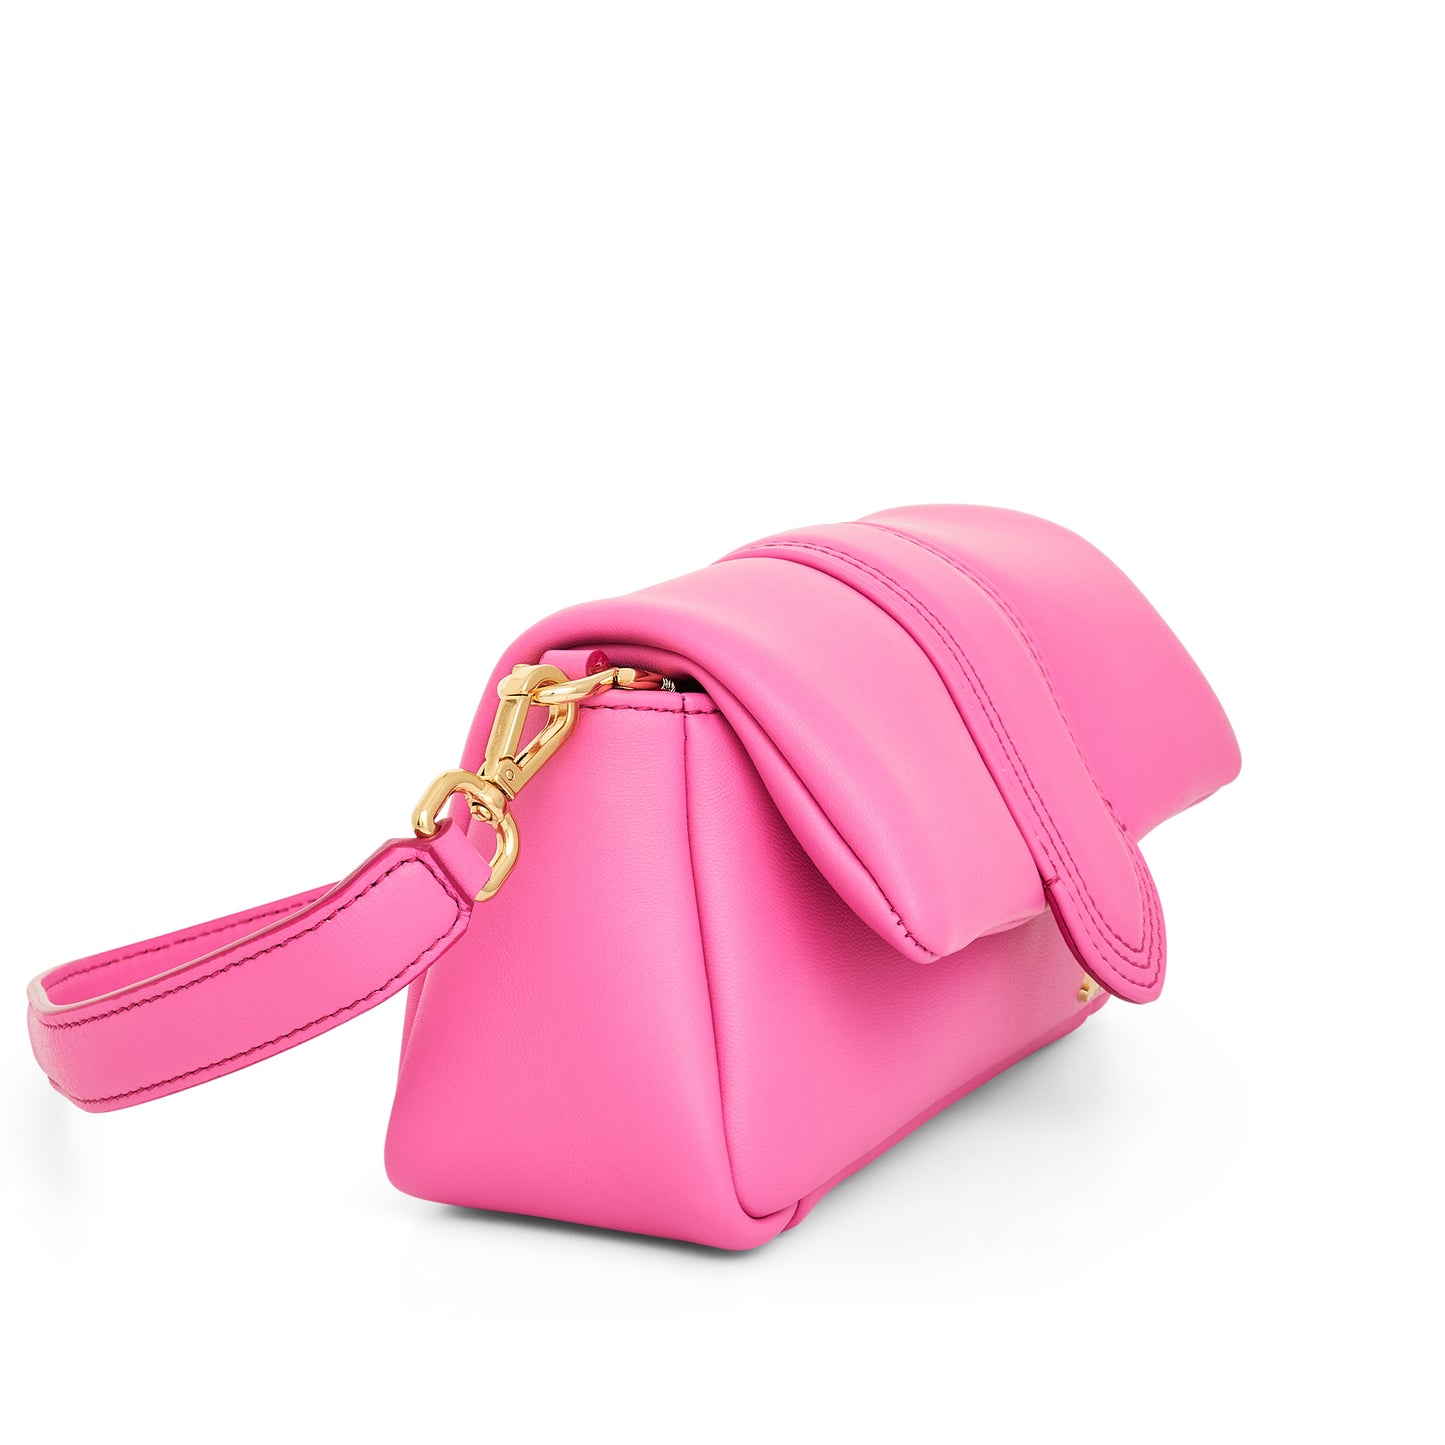 Le Petit Bambimou Leather Bag in Neon Pink